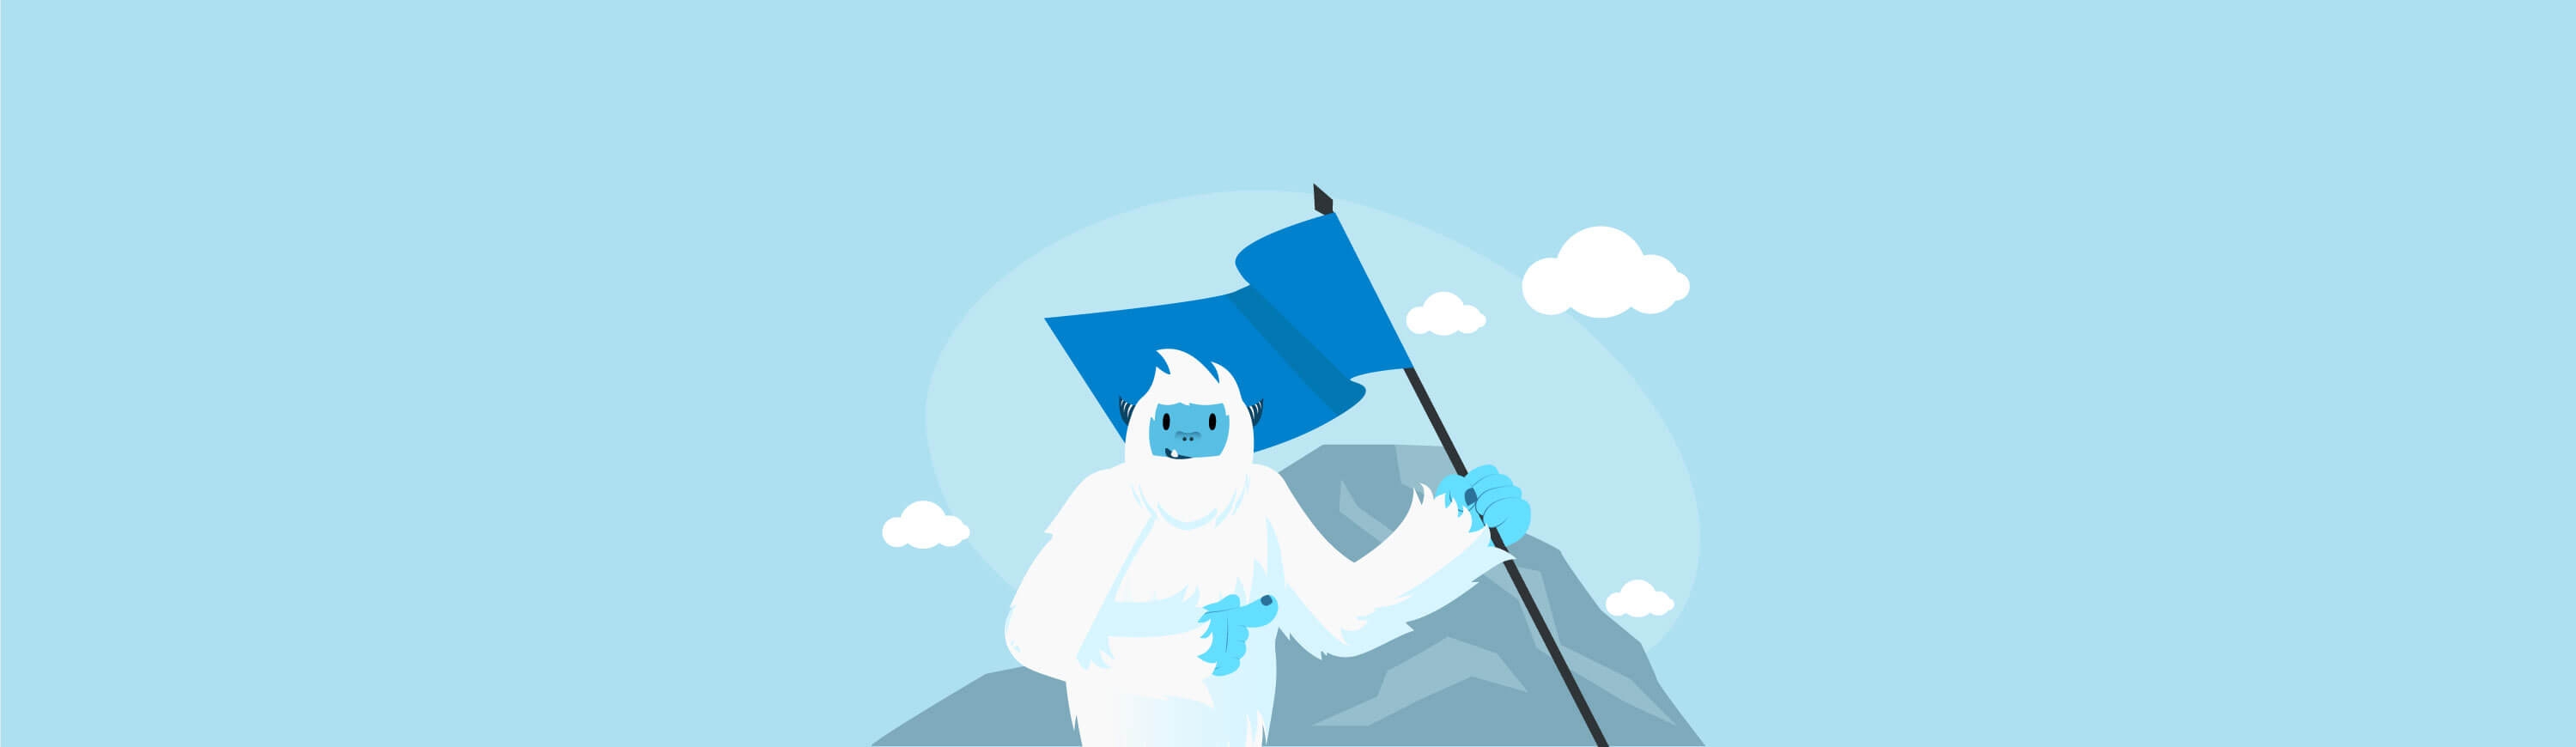 Illustration of Carl the yeti holding a flag near a mountain.